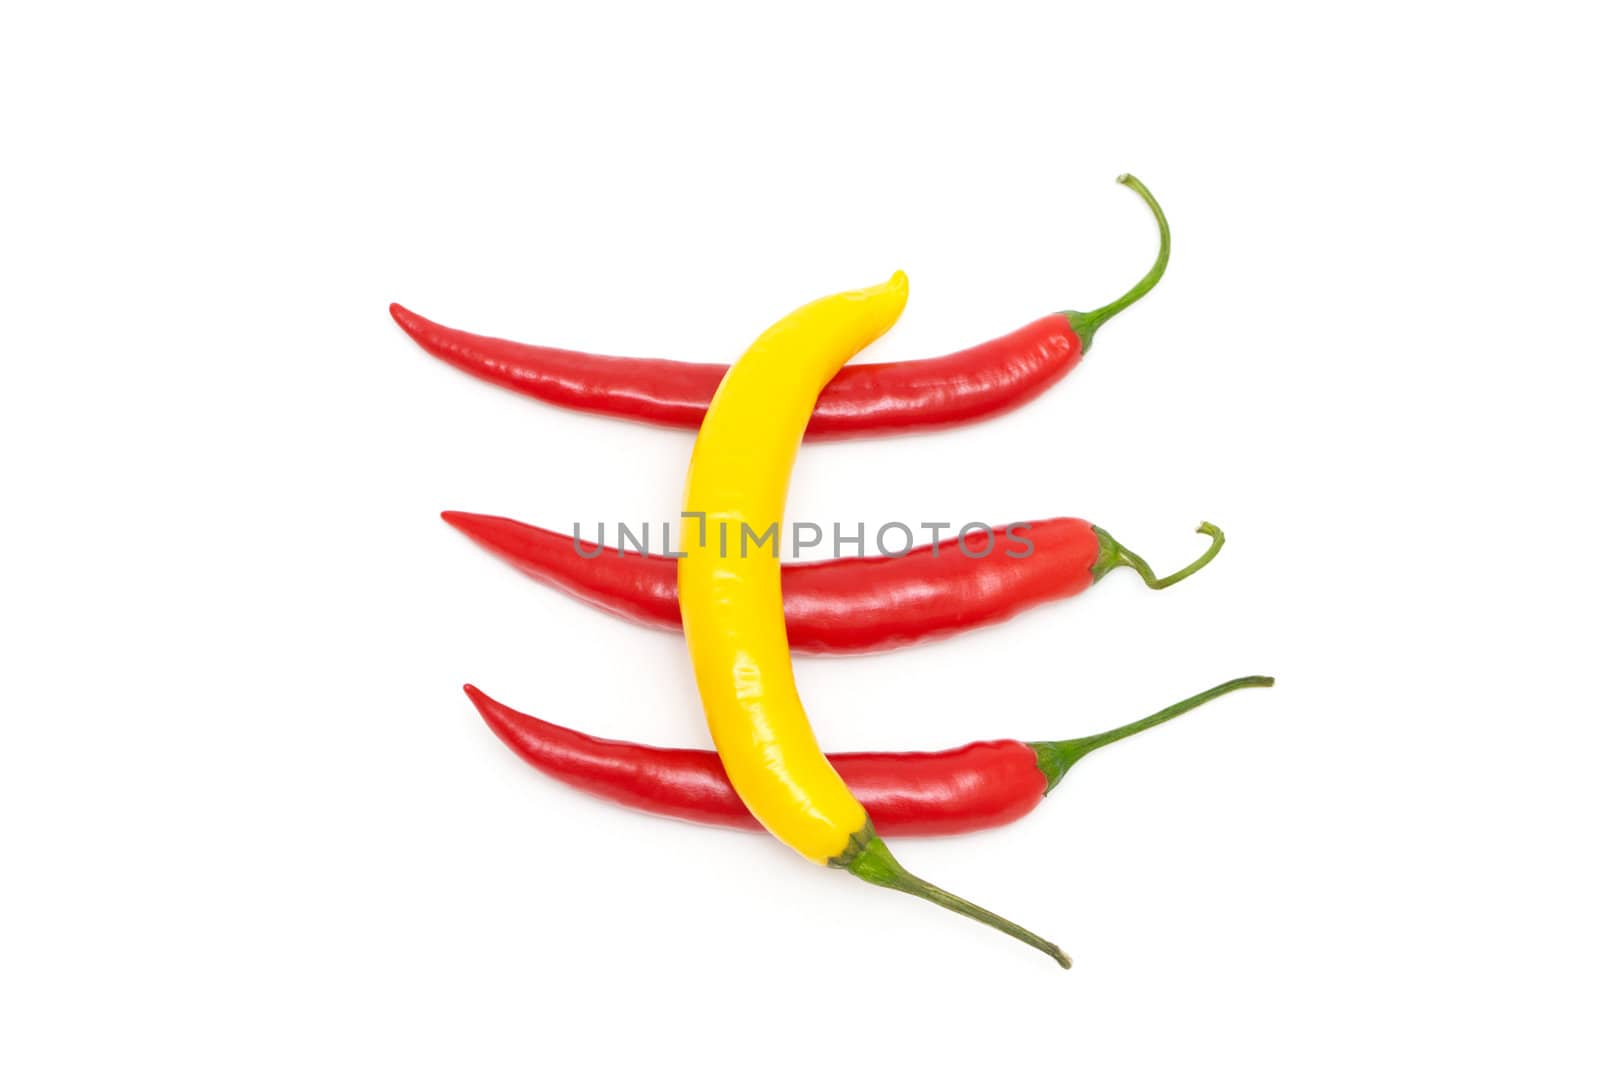 Four chili peppers by Olinkau